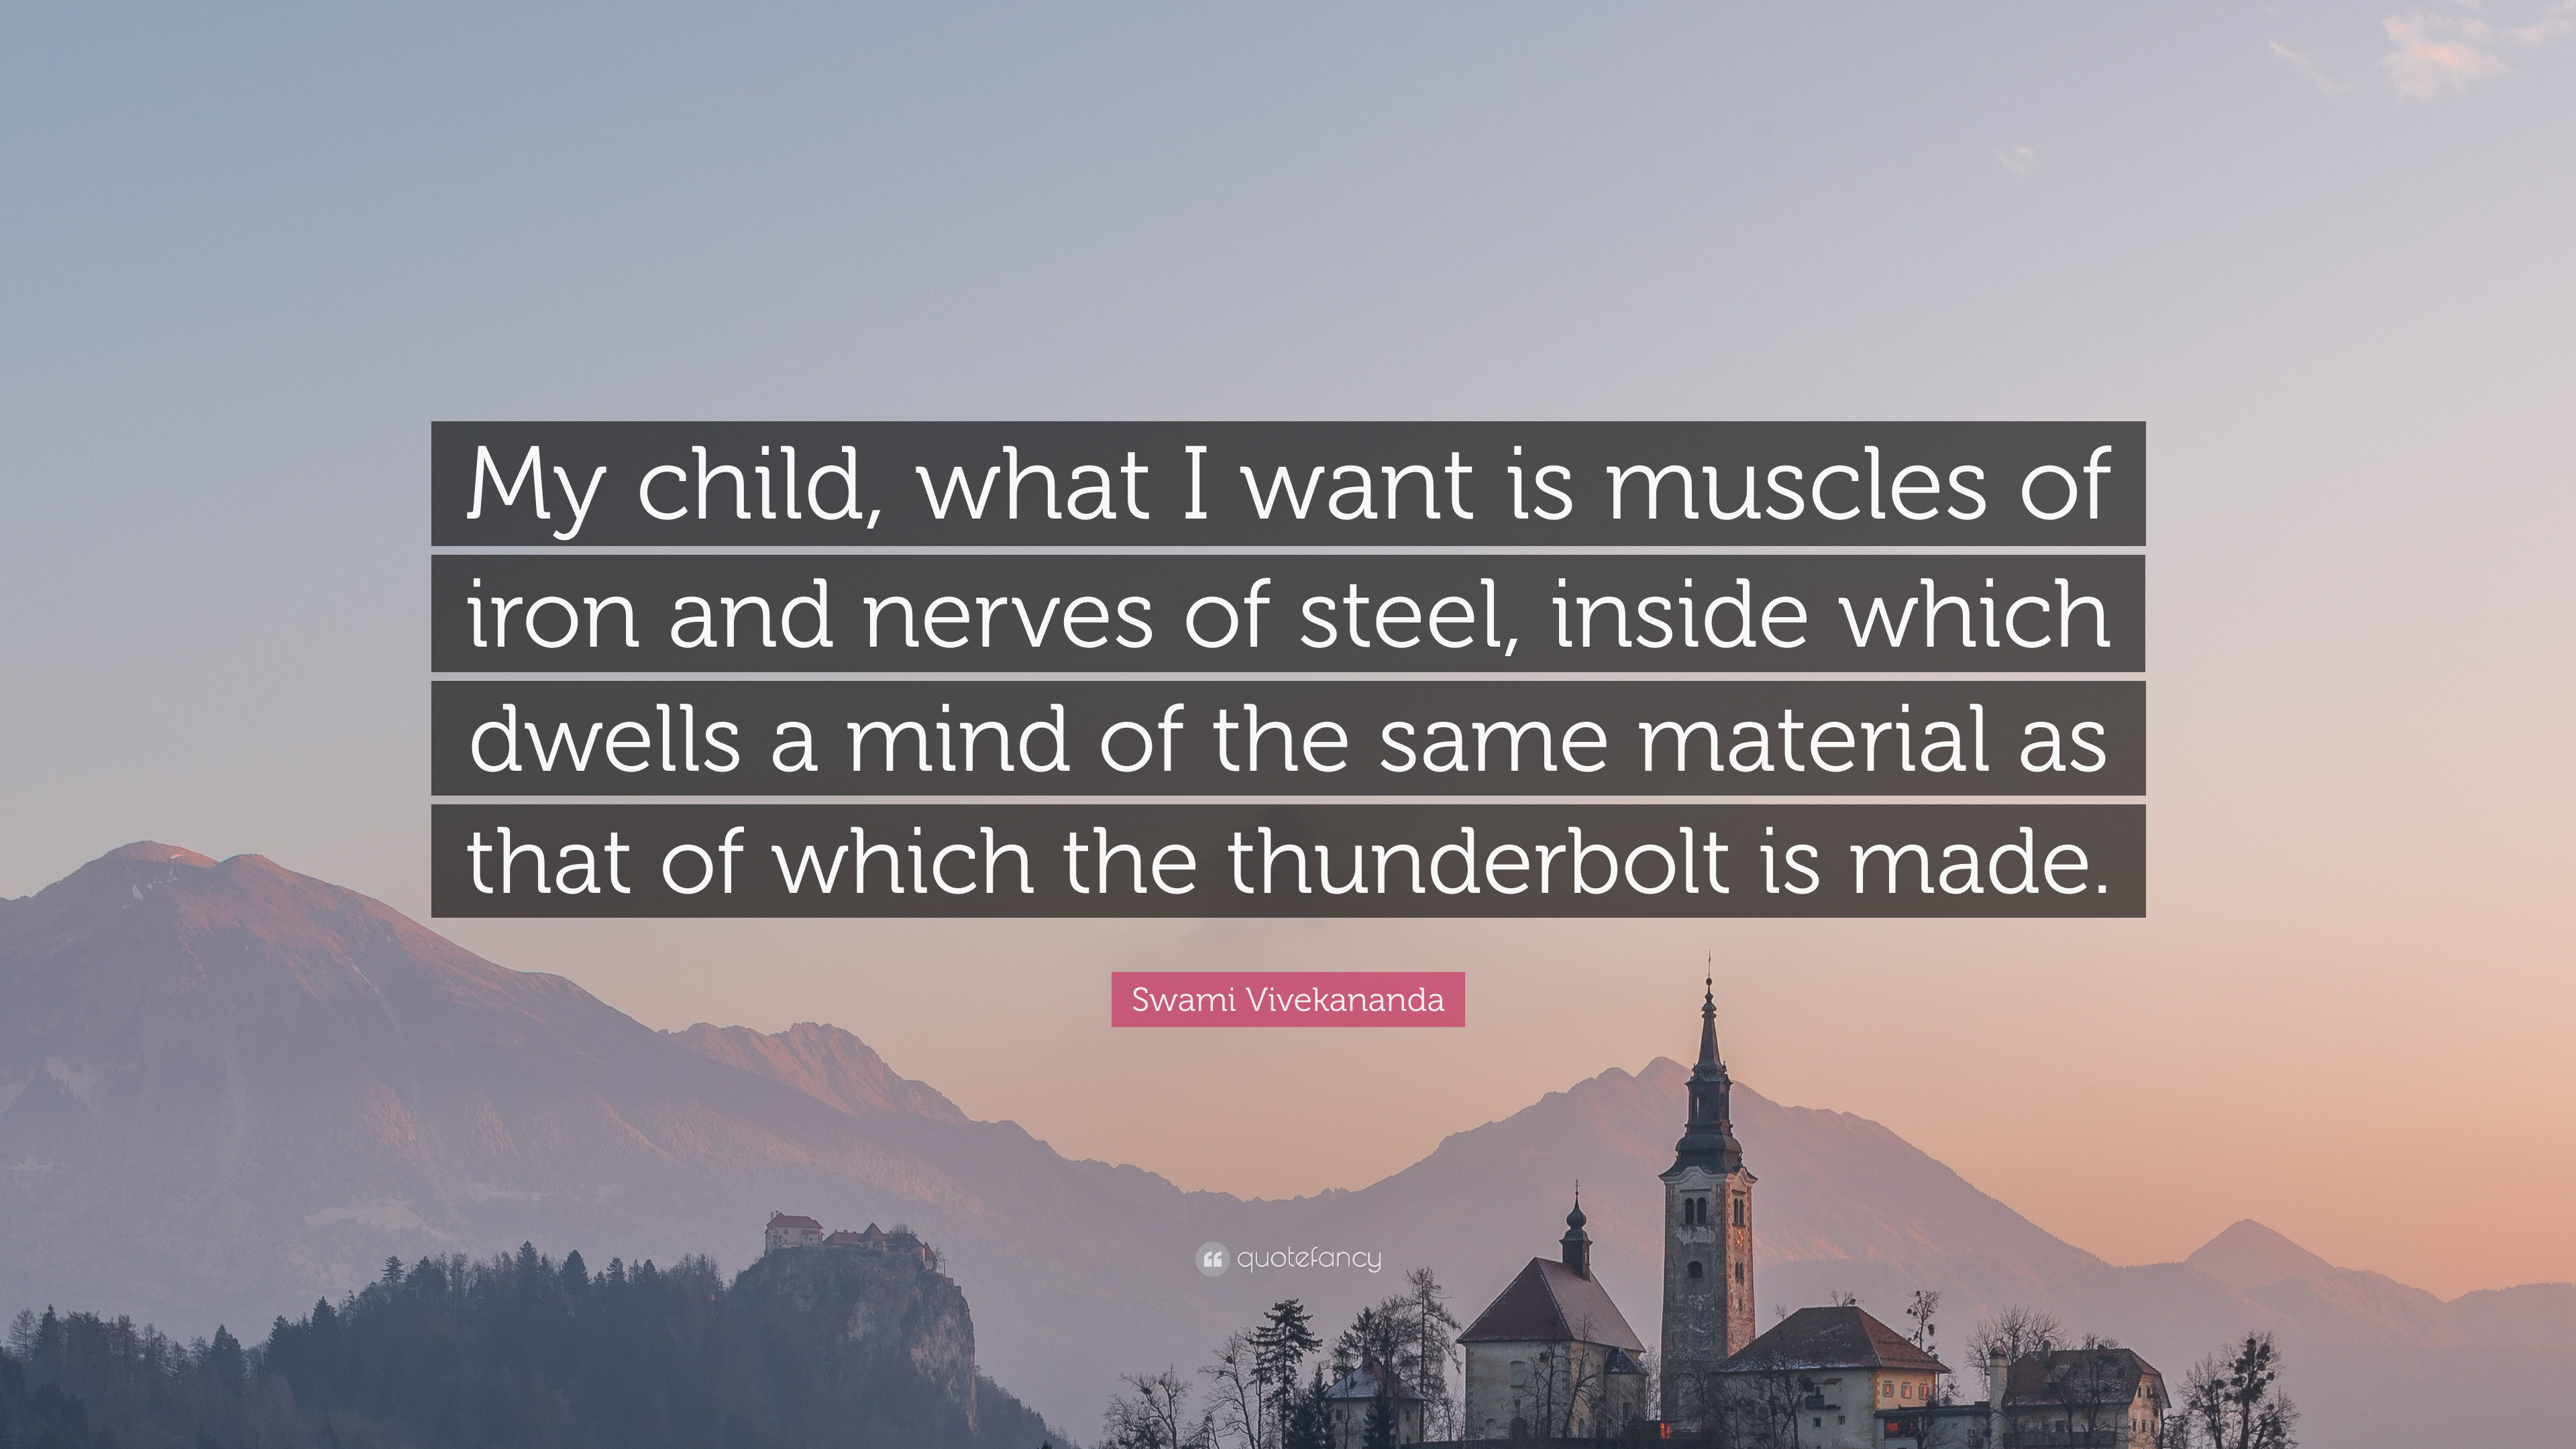 Swami Vivekananda Quote: “My child, what I want is muscles of iron ...